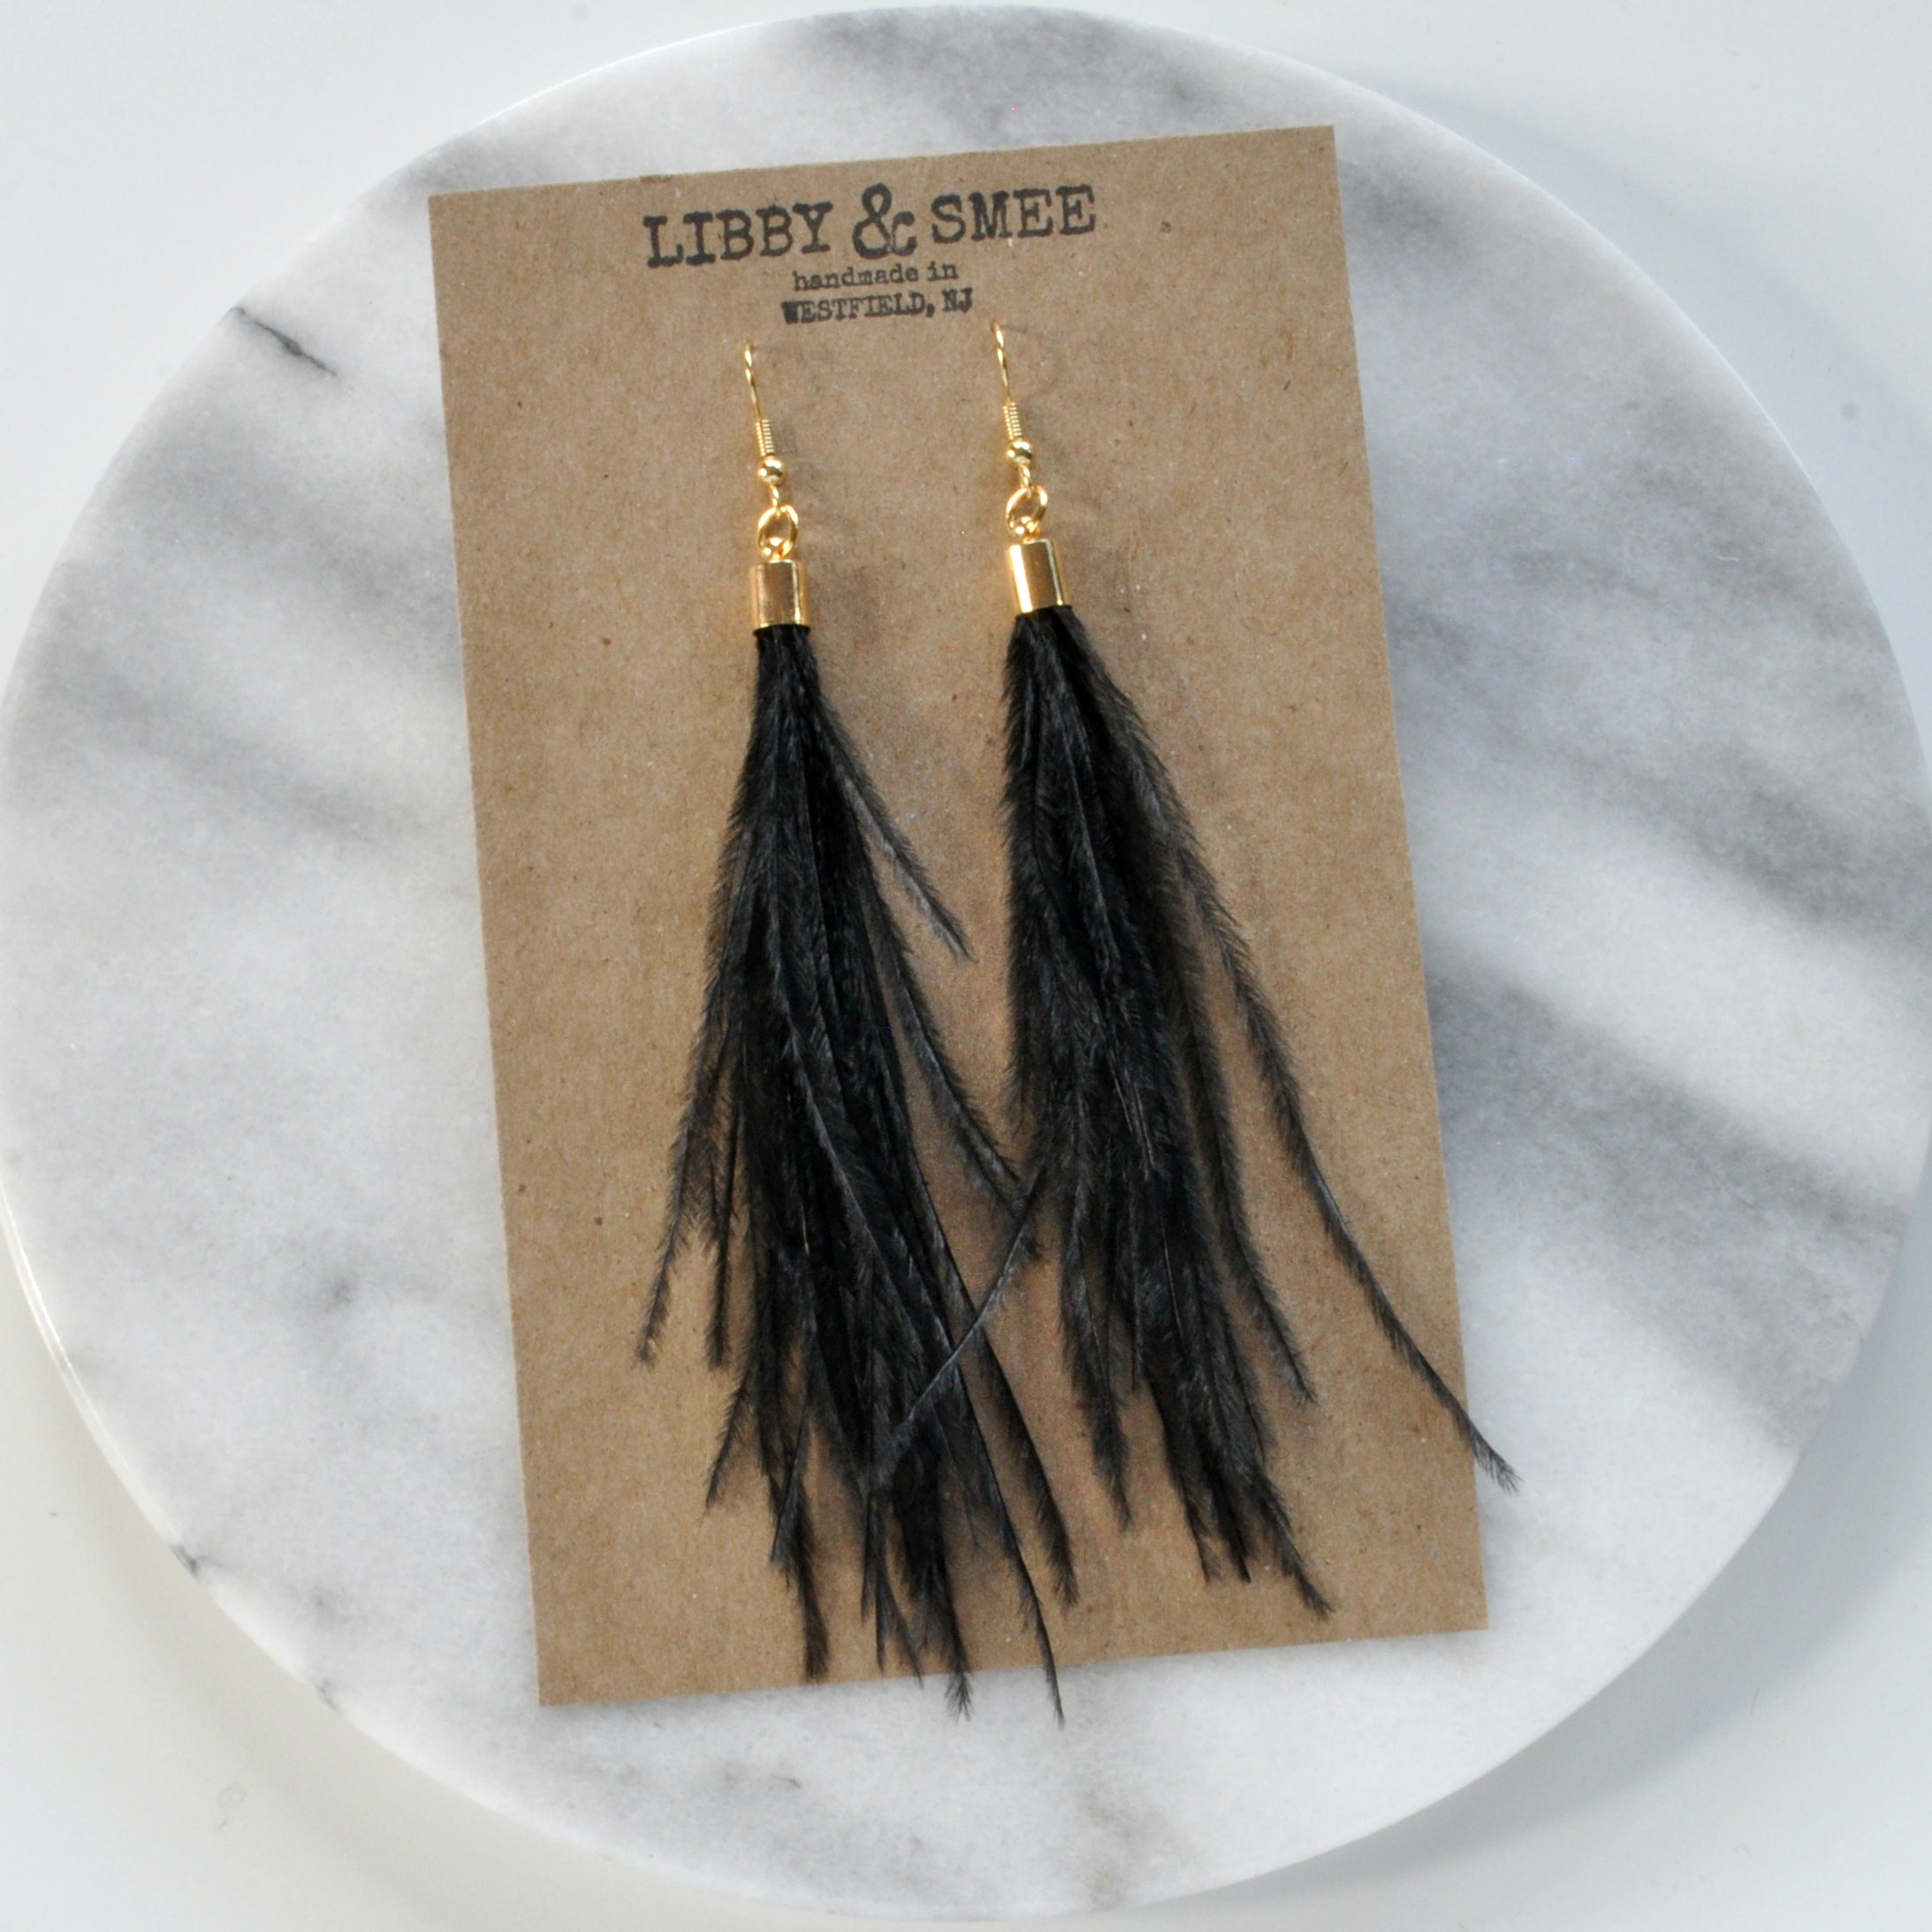 Libby & Smee Black Feather Earrings with Gold Caps, Still Life on Kraft Earring Card